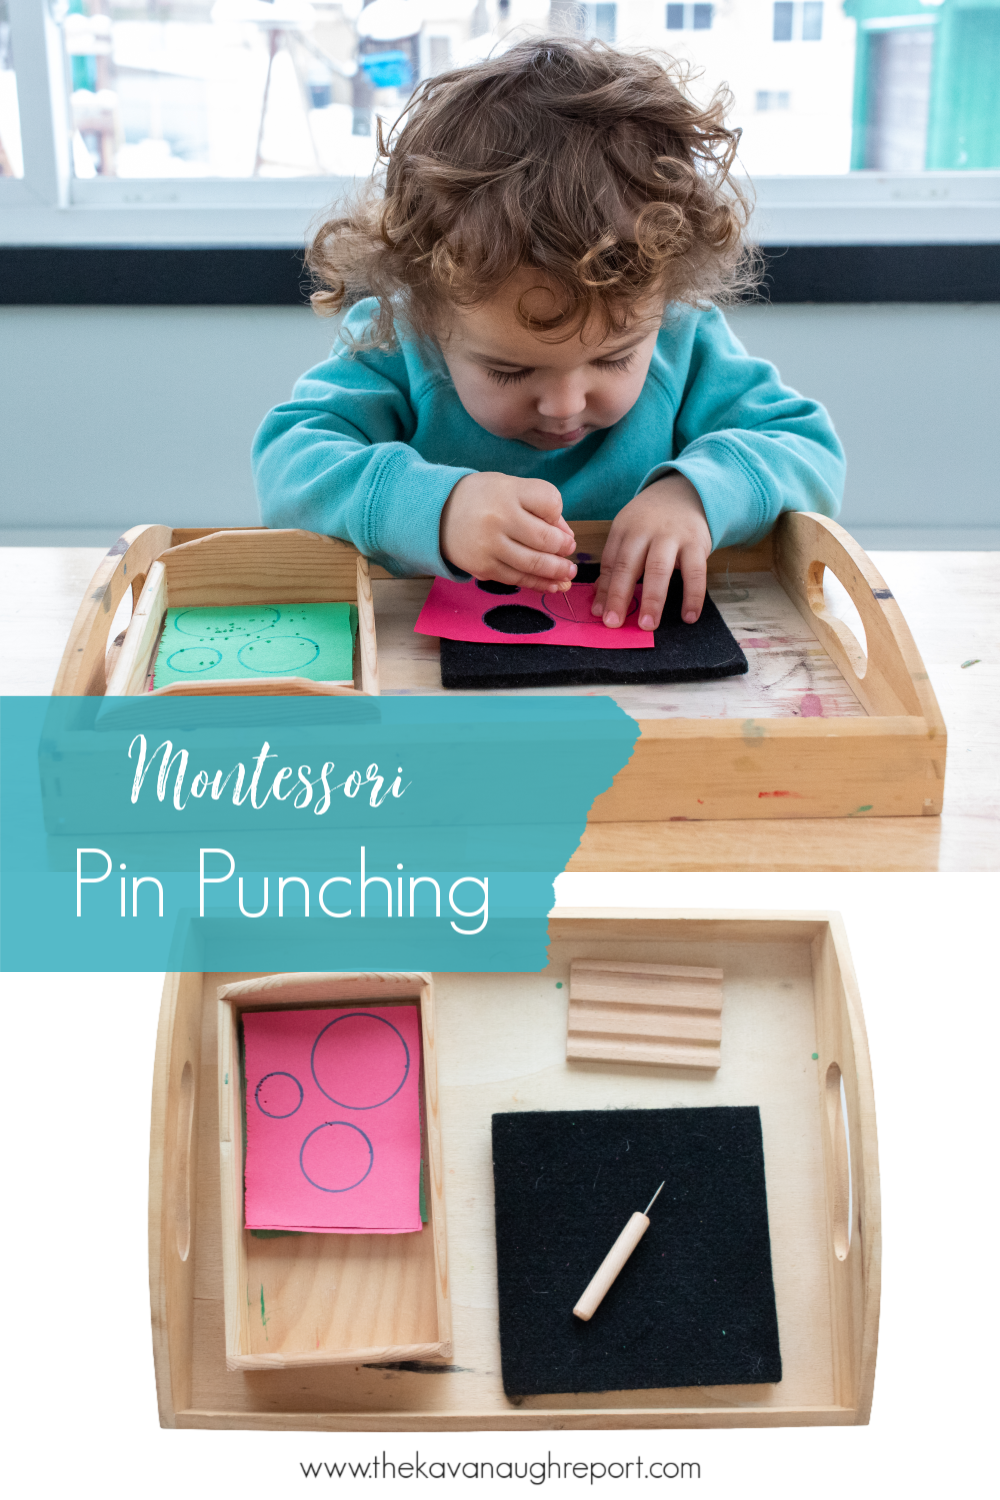 Small Felt Pad for Punching - Montessori Services